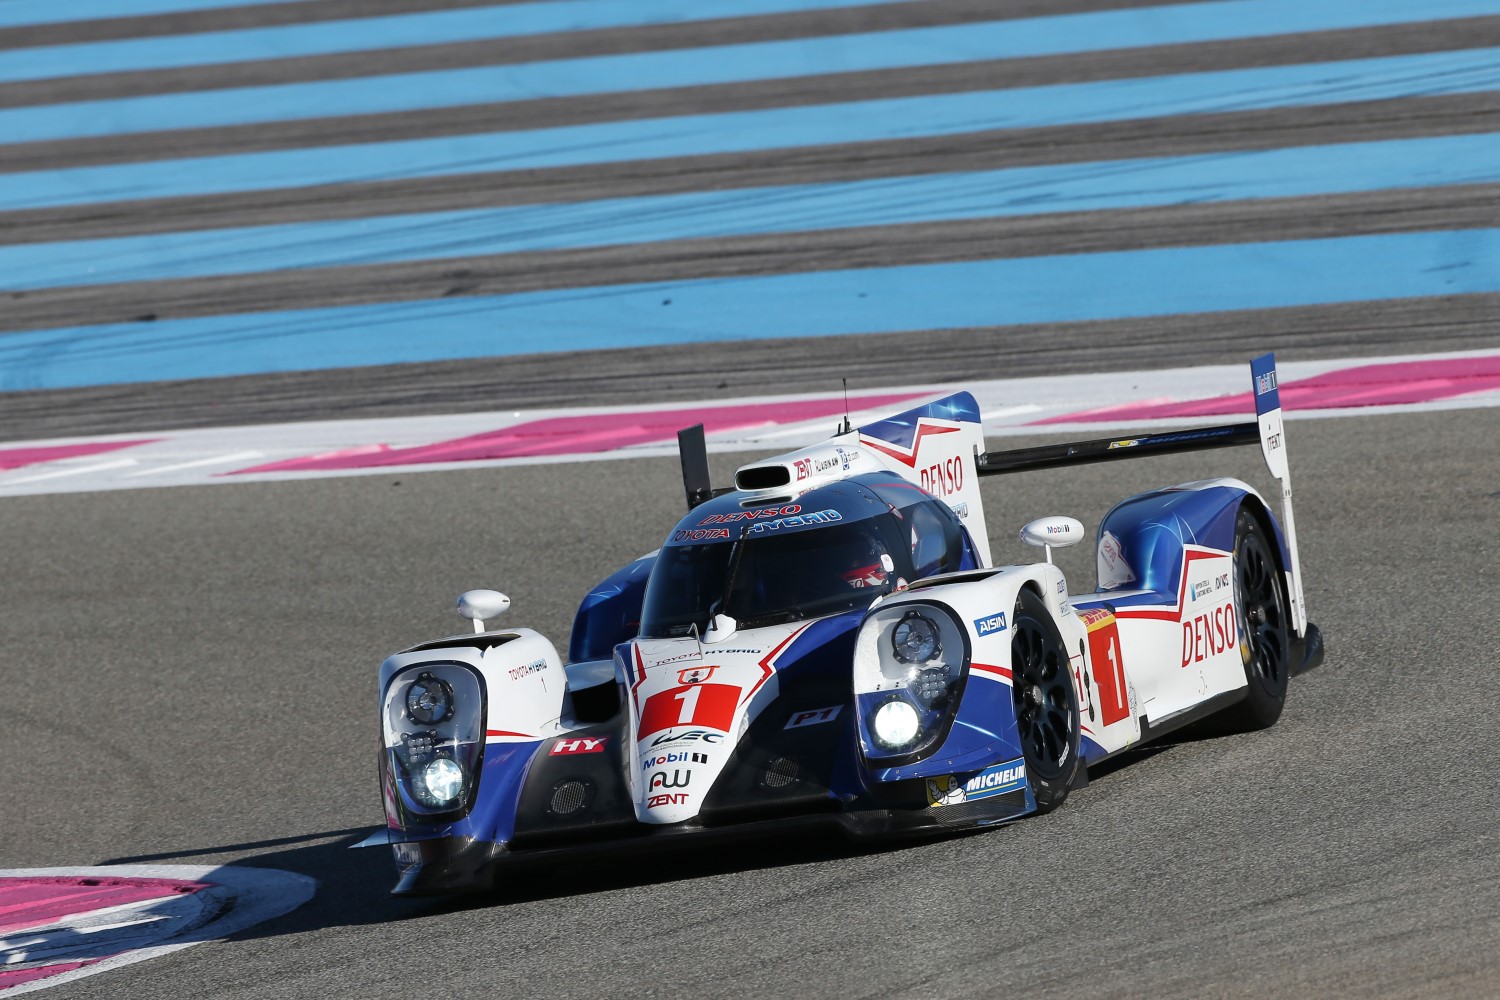 Toyota TS040 - the car the Japanese hope will defeat the Germans again in 2015